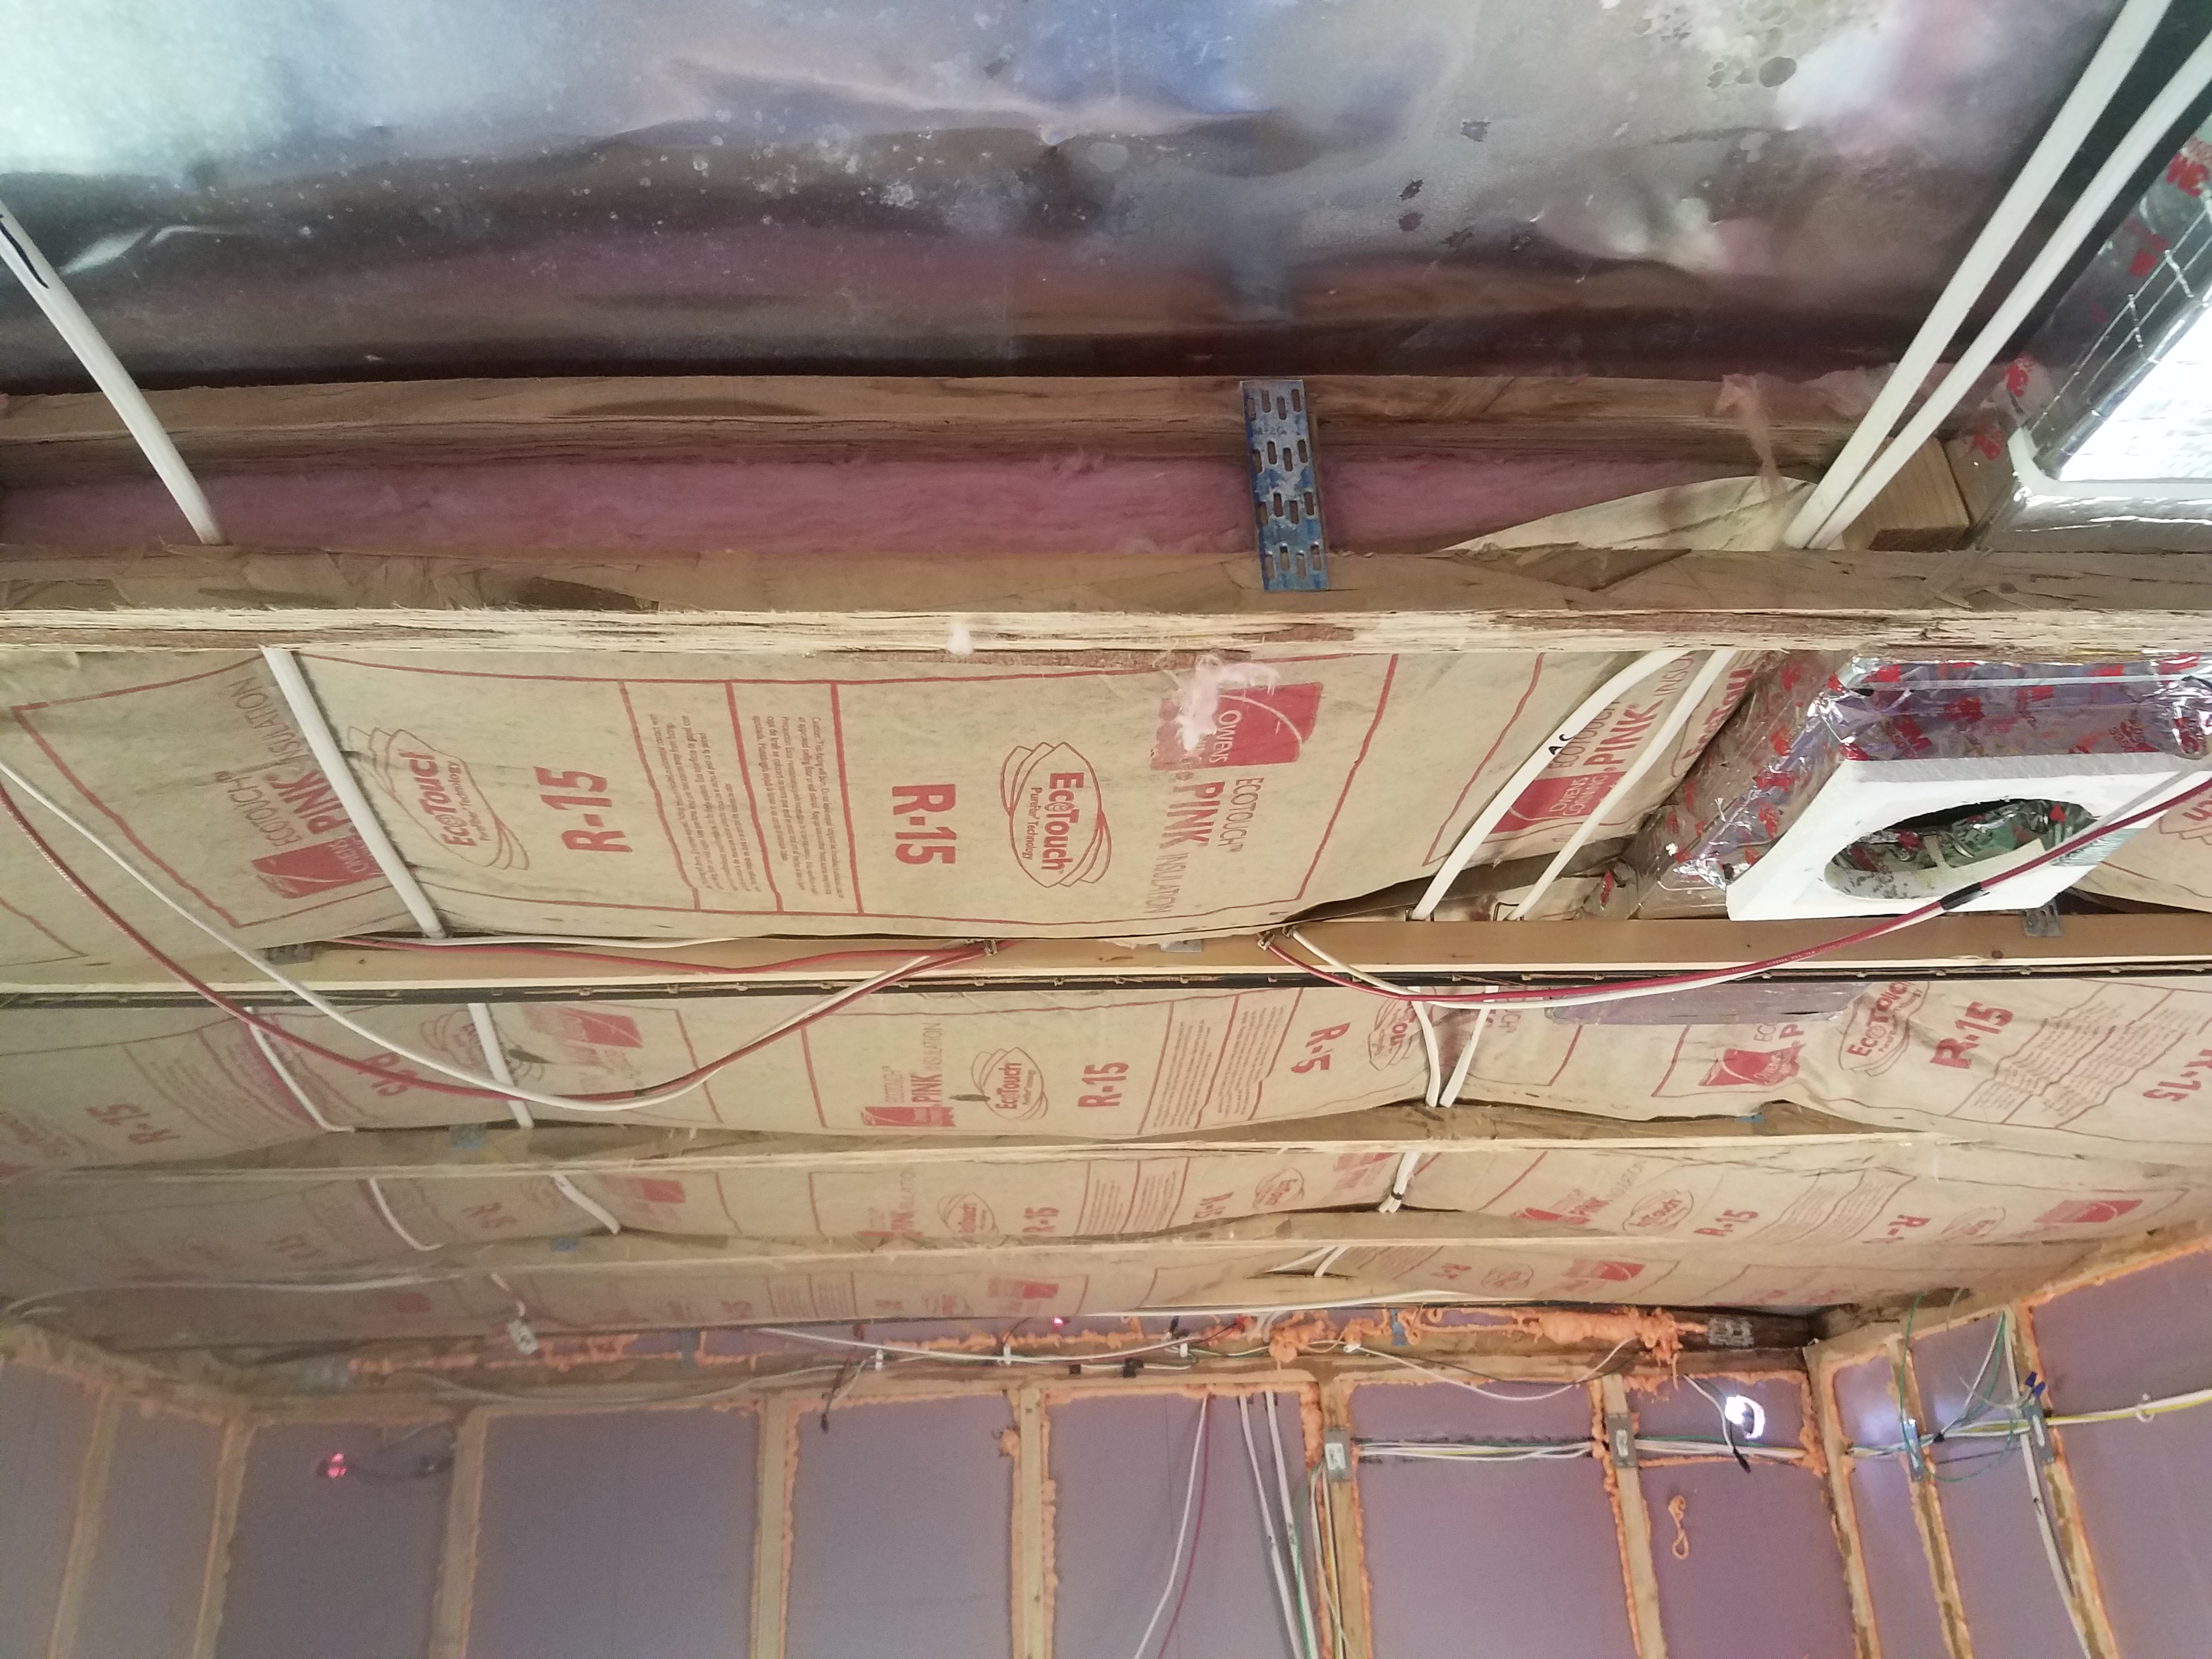 Fiberglass batting in the roof of the travel trailer